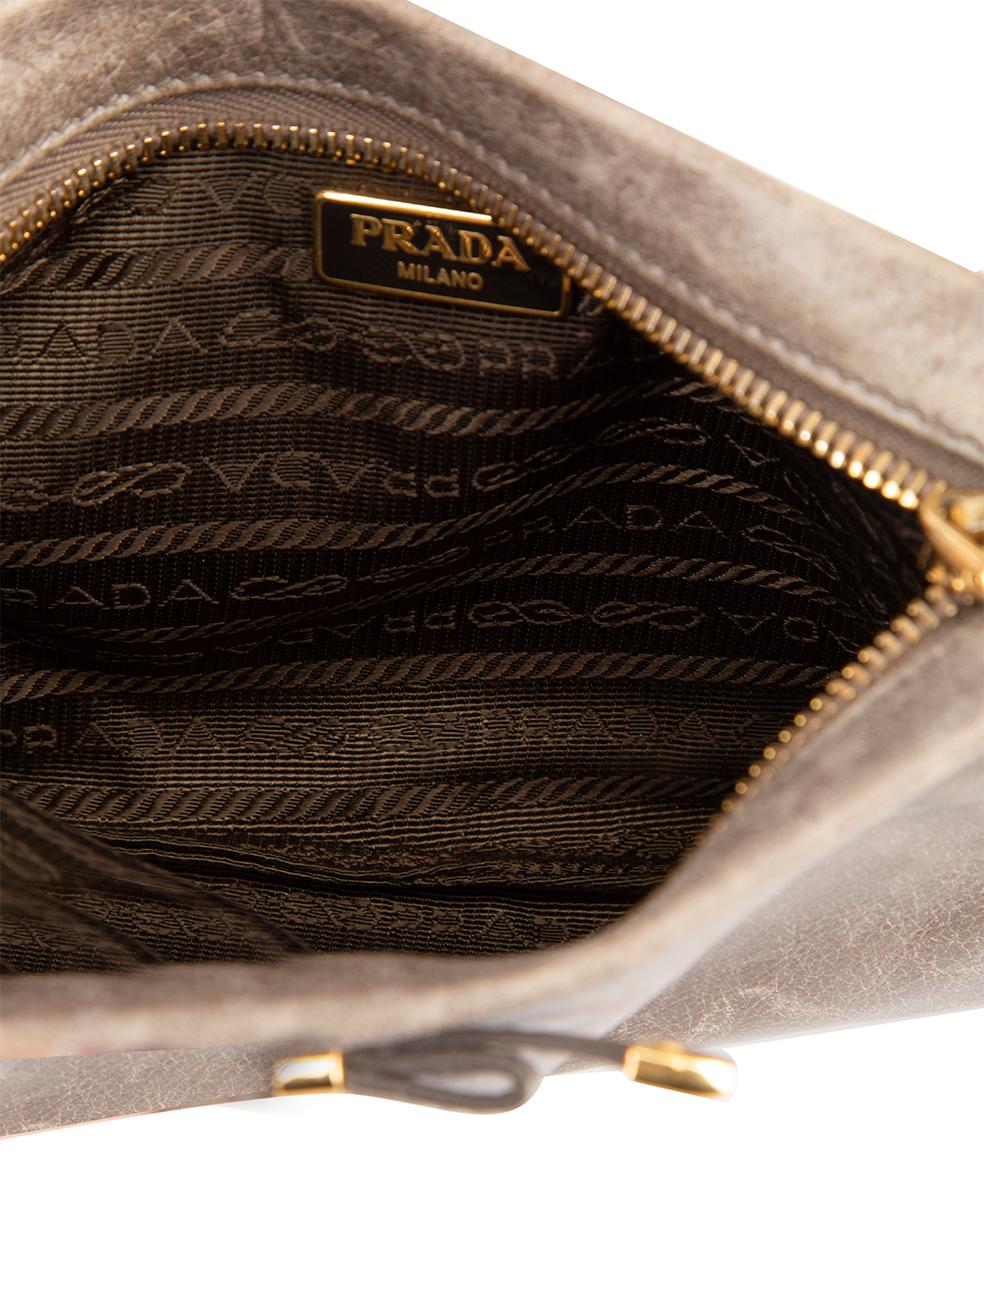 Prada Women's Brown Leather Bow Accent Wristlet Clutch For Sale 2